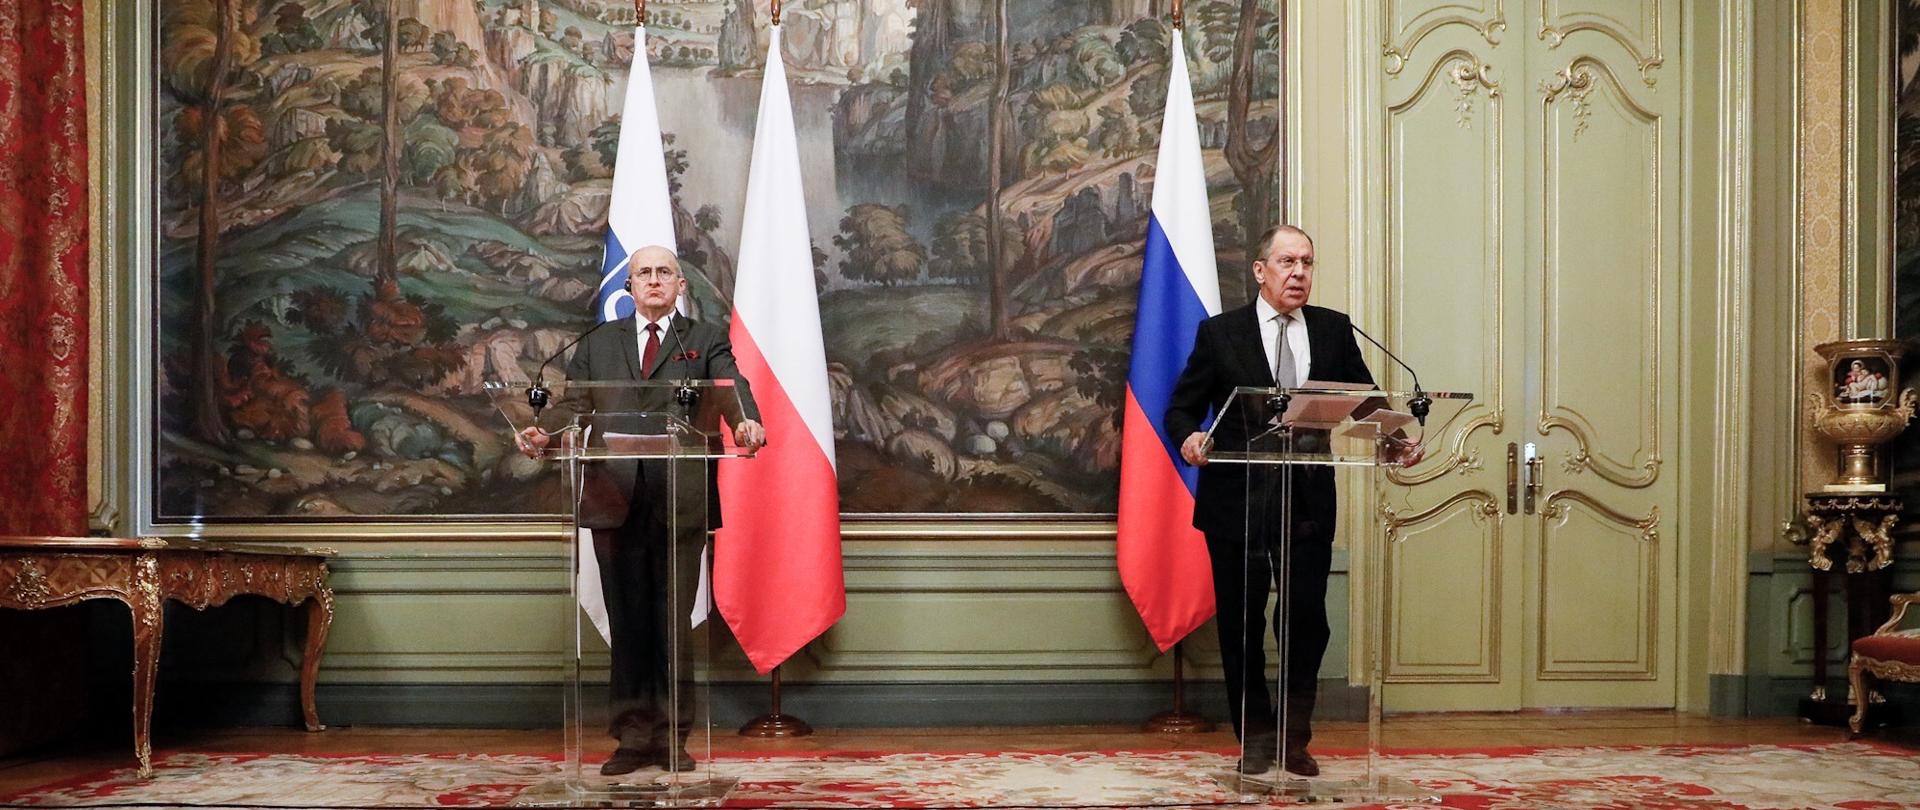 Minister Zbigniew Rau together with Minister Sergey Lavrov during a press conference in Moscow